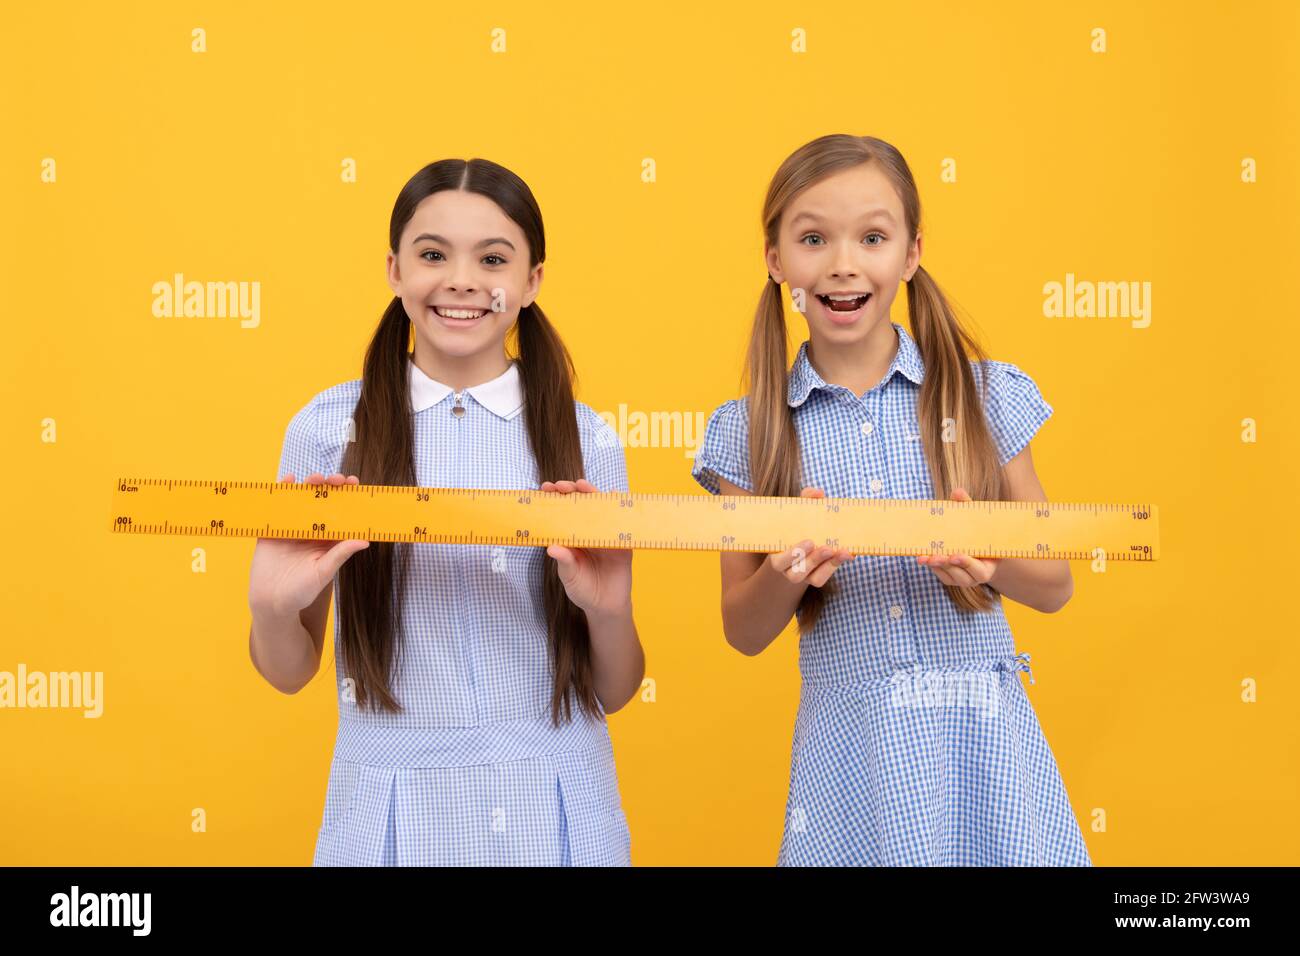 Ruler makes the drawing look better. Small child holding drawing instrument  on yellow background. Little girl using ruler for drawing straight lines.  Having geometry or technical drawing lessons Stock Photo - Alamy